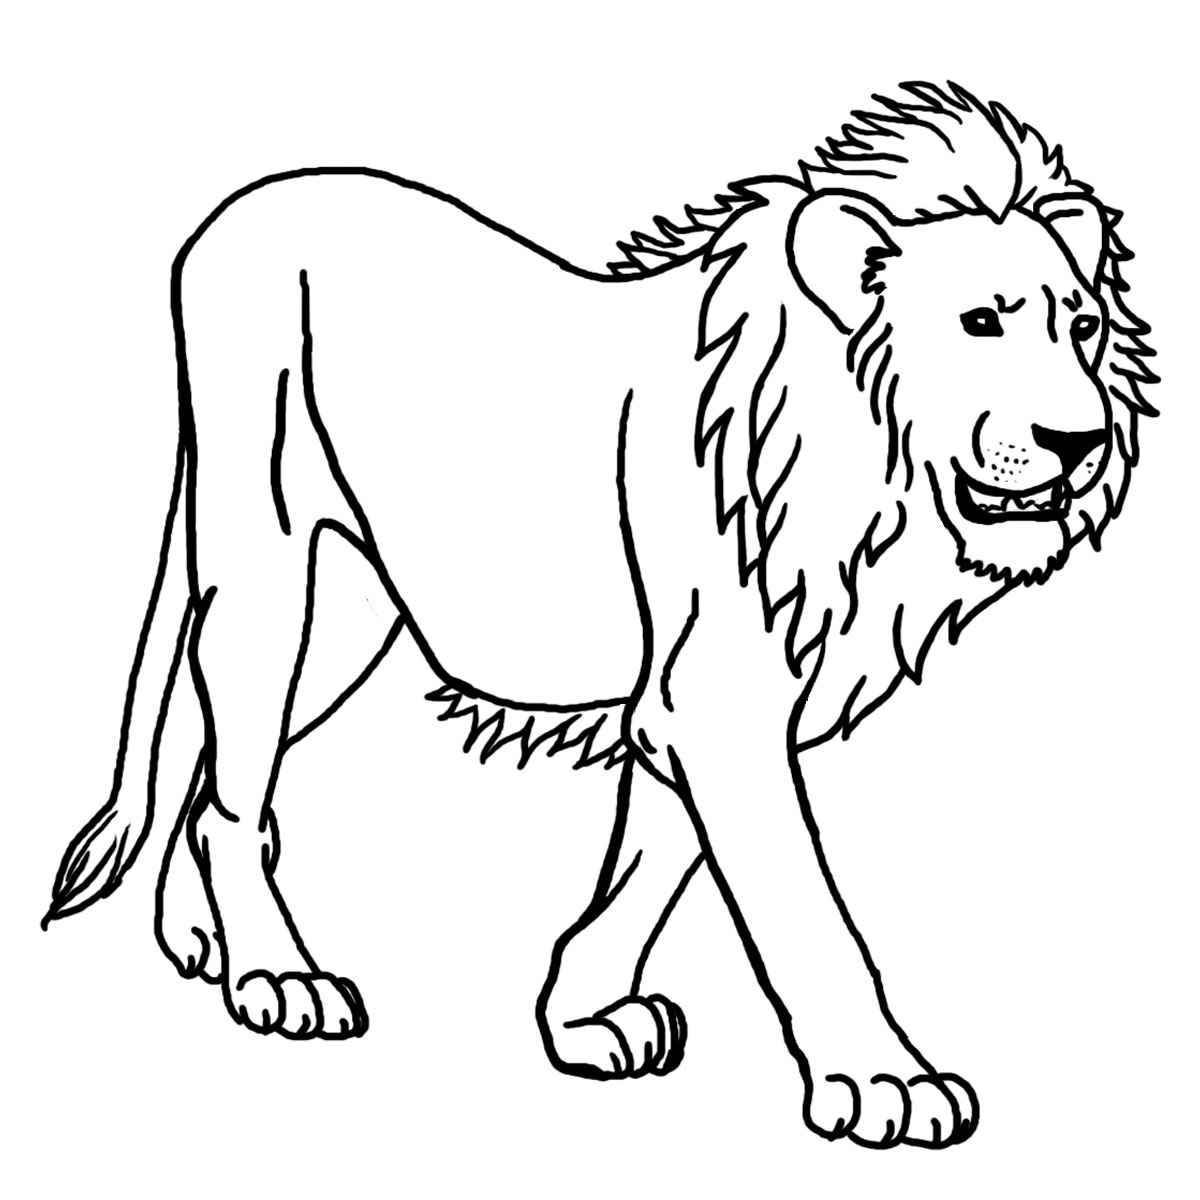 Lion Free To Color For Children - Lion Kids Coloring Pages - Free Printable Picture Of A Lion